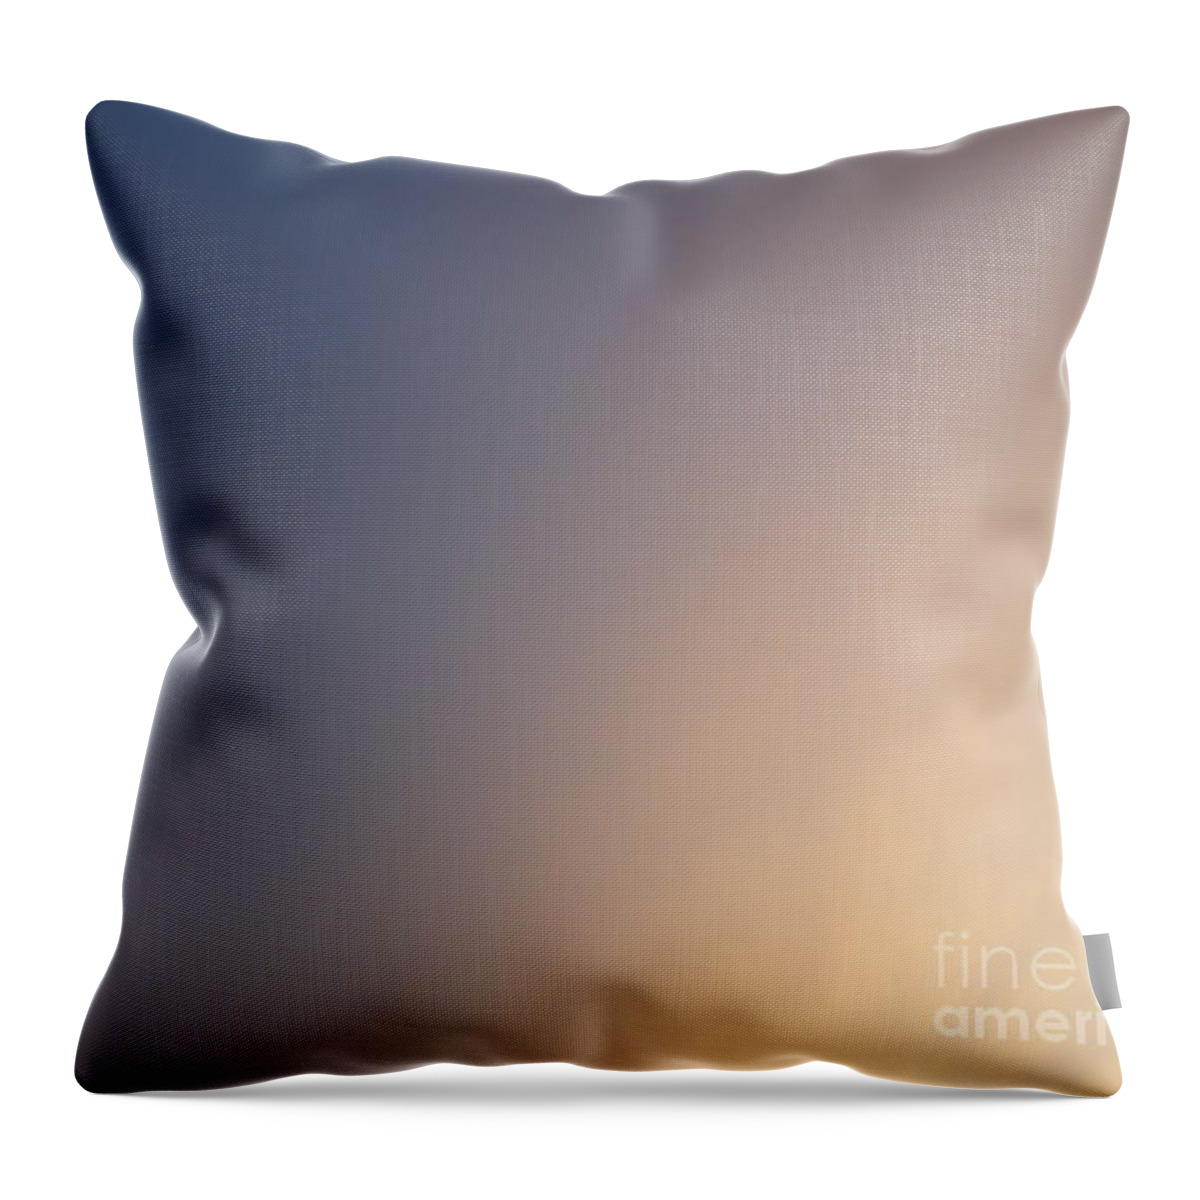 Ombre Sky Throw Pillow featuring the photograph Ombre Sky by Jacqueline Athmann